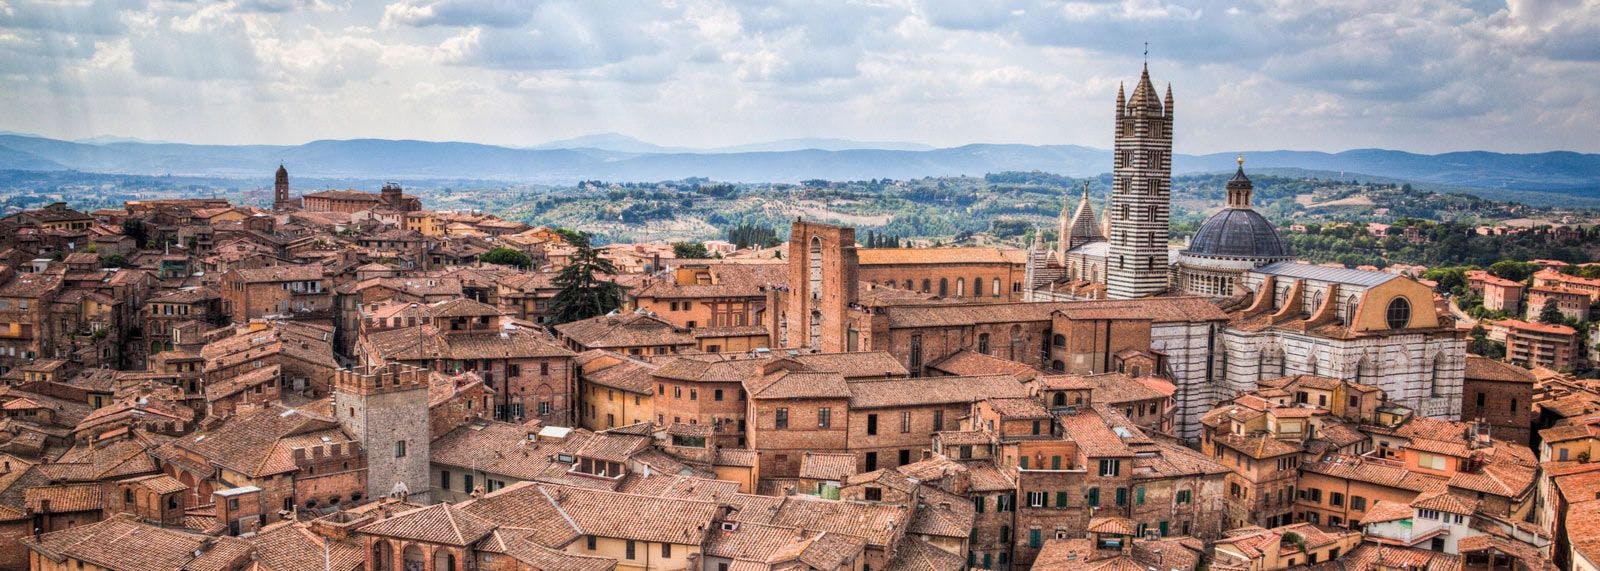 A view of the russet skyline of Siena